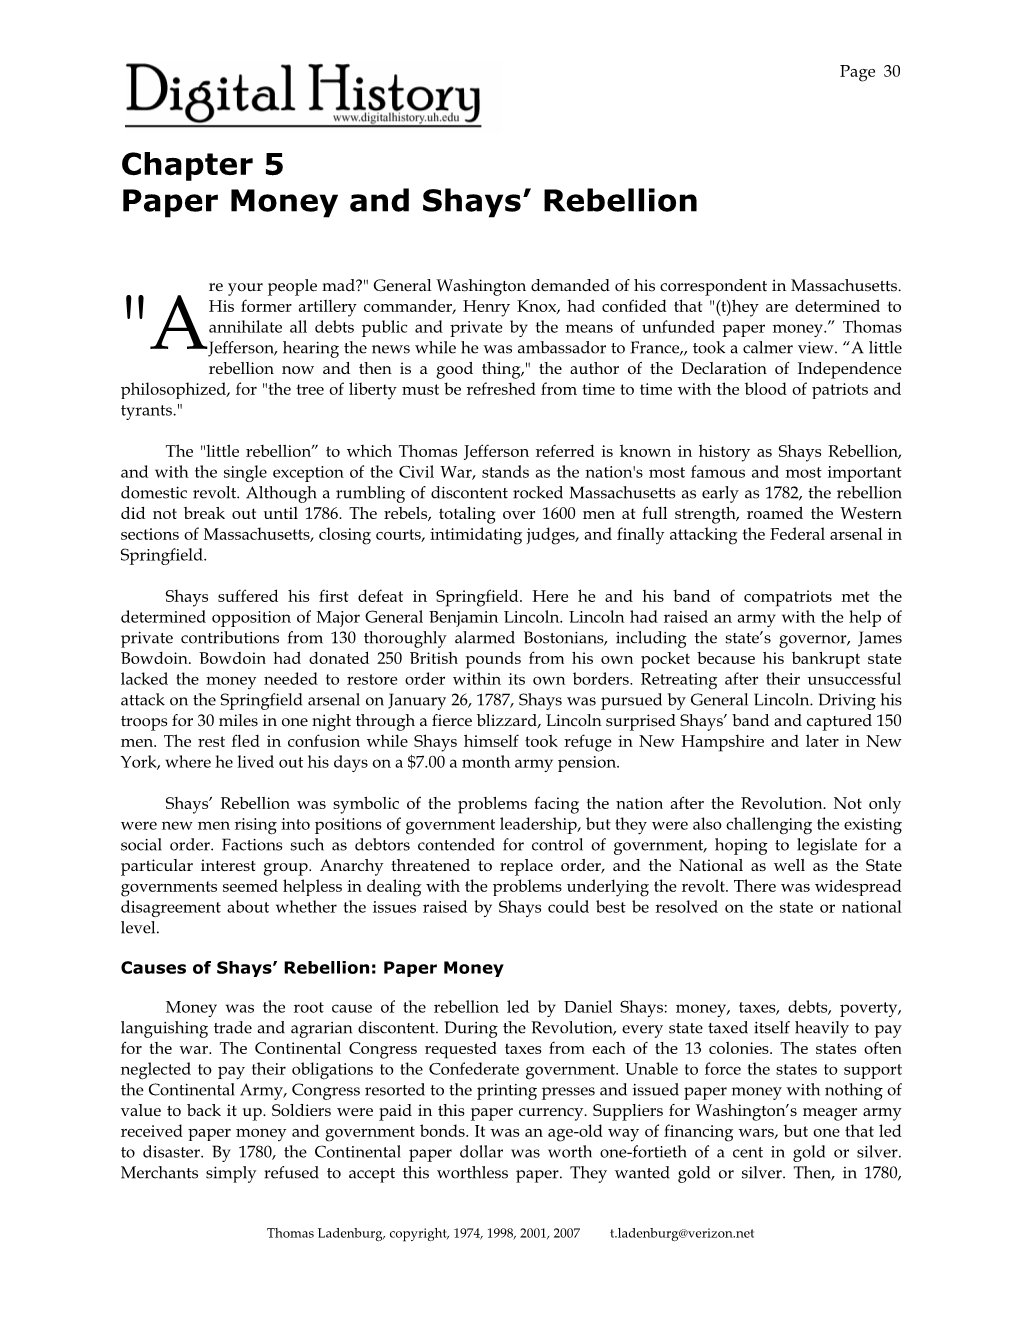 Paper Money and Shays' Rebellion